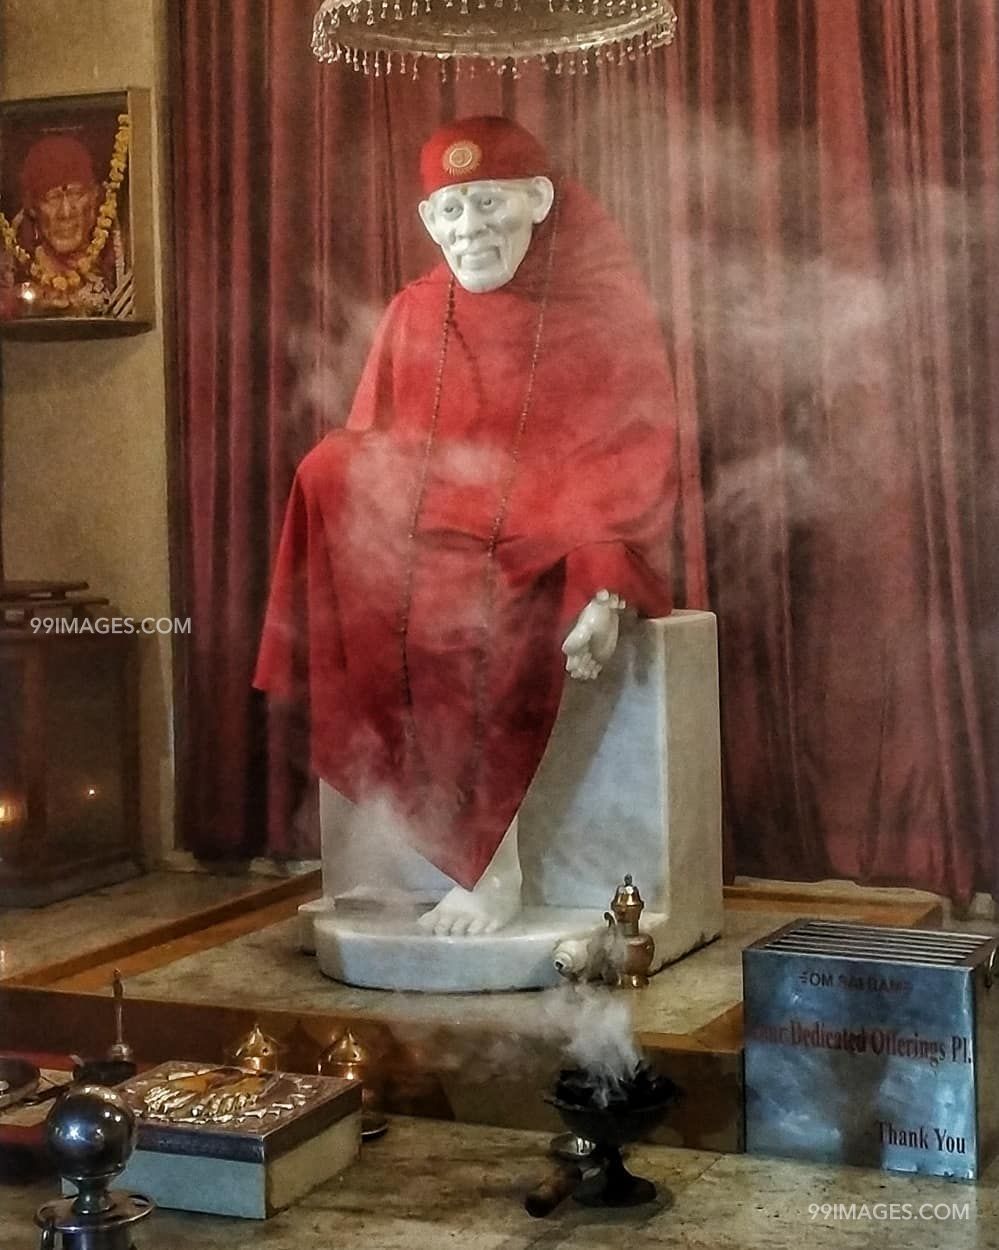 Sai Baba Hd Images For Android/iphone Mobile & Hd Wallpapers - HD Wallpaper 